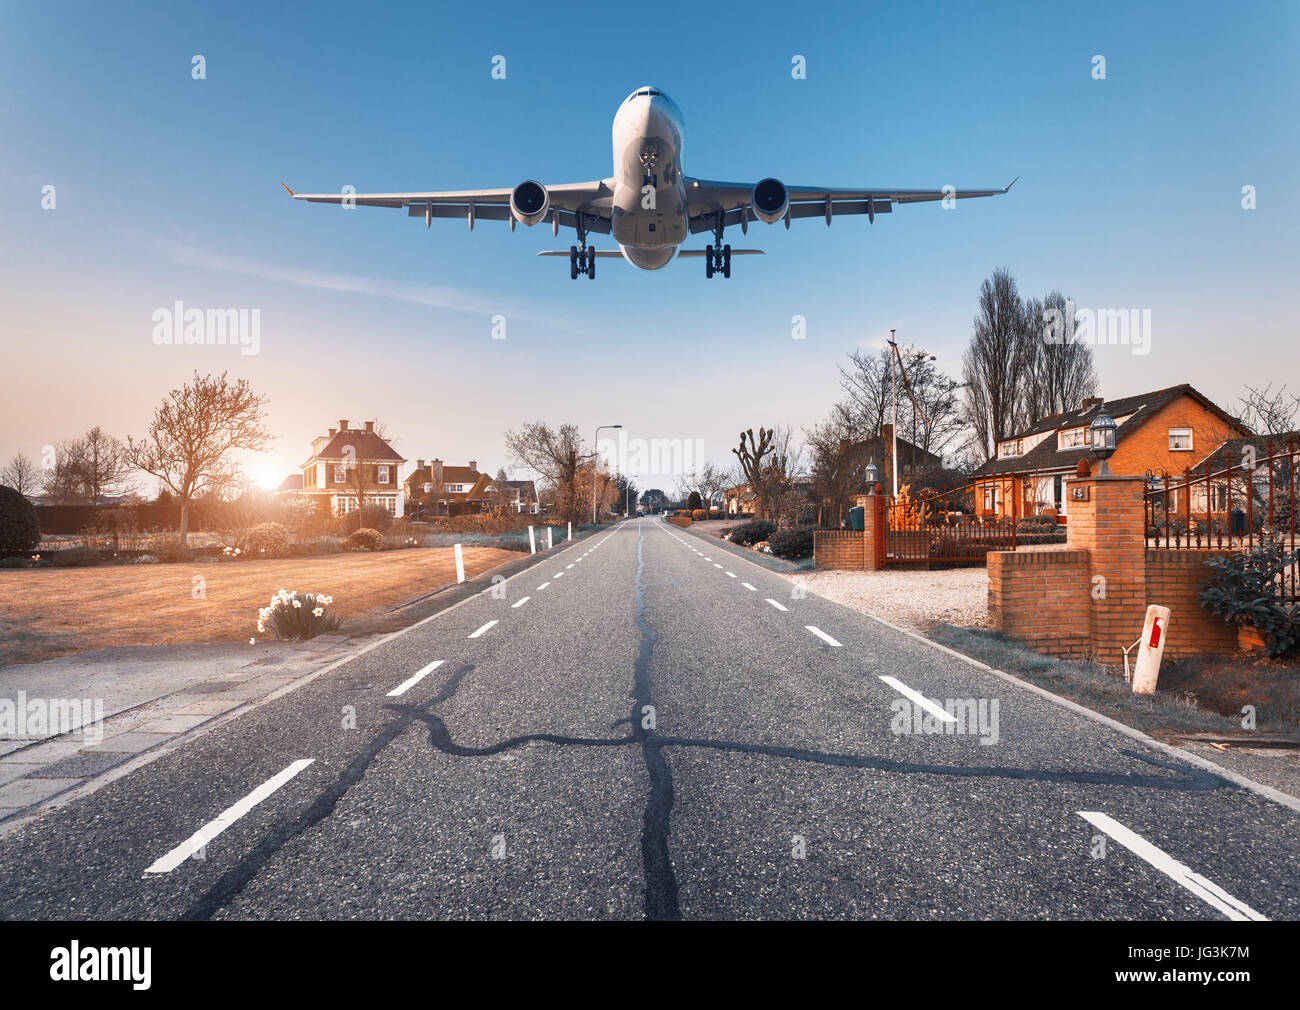 Beautiful cityscape with passenger airplane is flying in the sunset sky above the asphalt road  through the town with houses and courtyards at sunset  Stock Photo